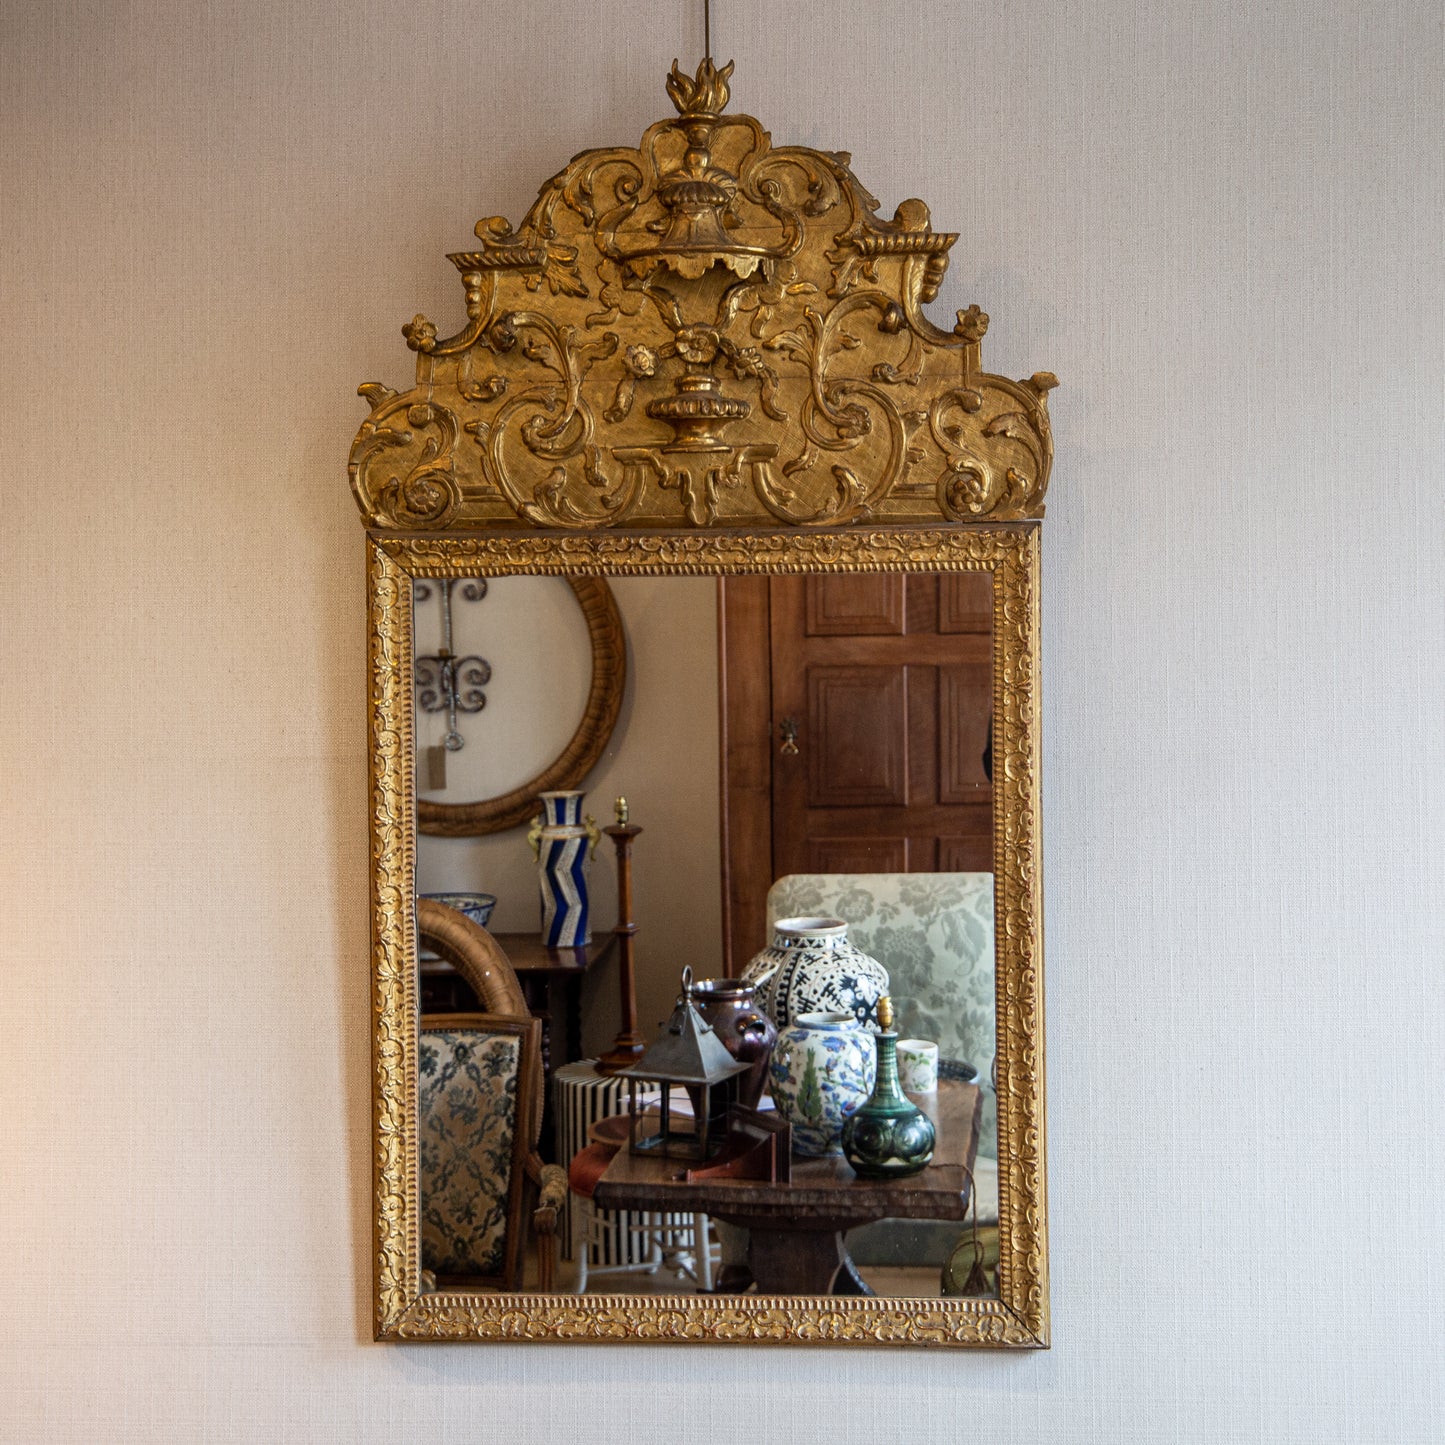 A Large Louis XIV Style Gilded Mirror with Elaborate Cresting